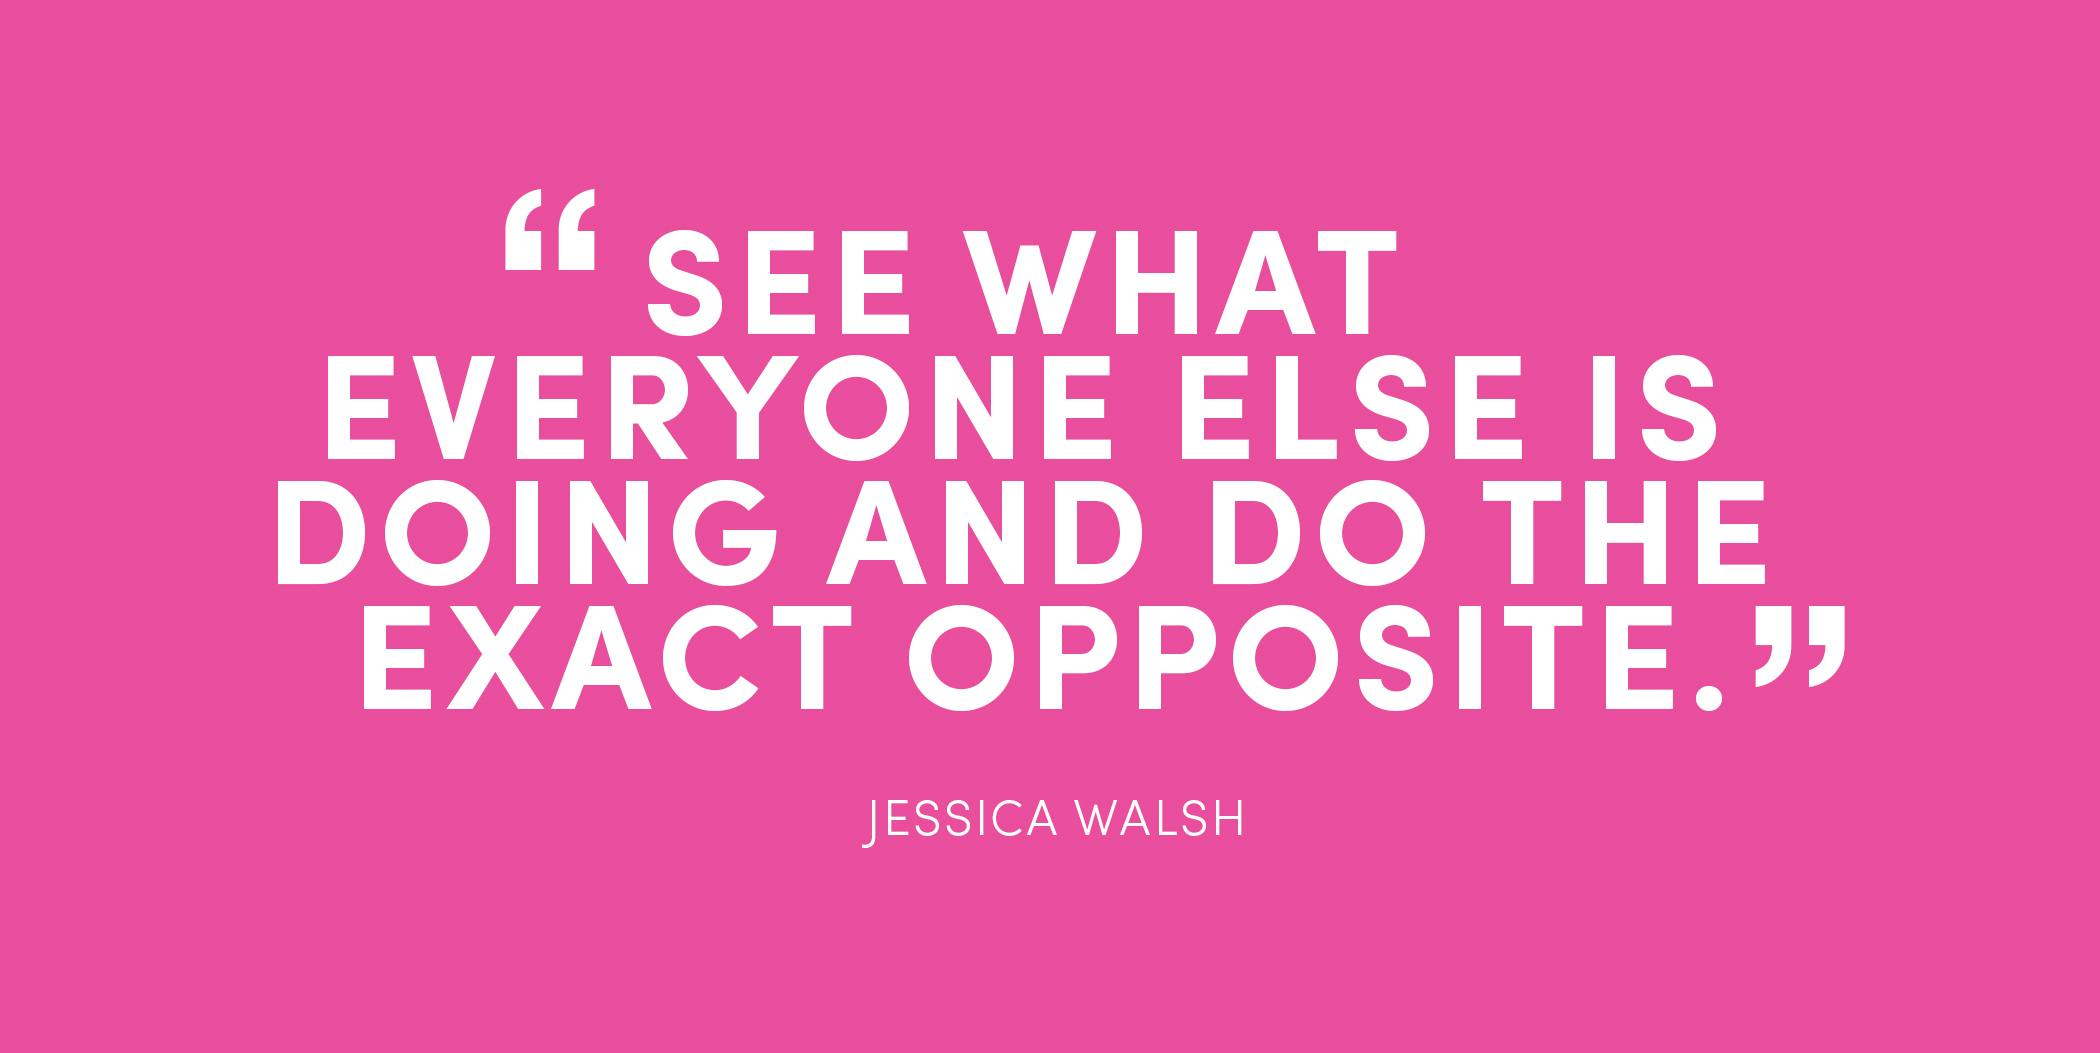 Jessica Walsh Quote